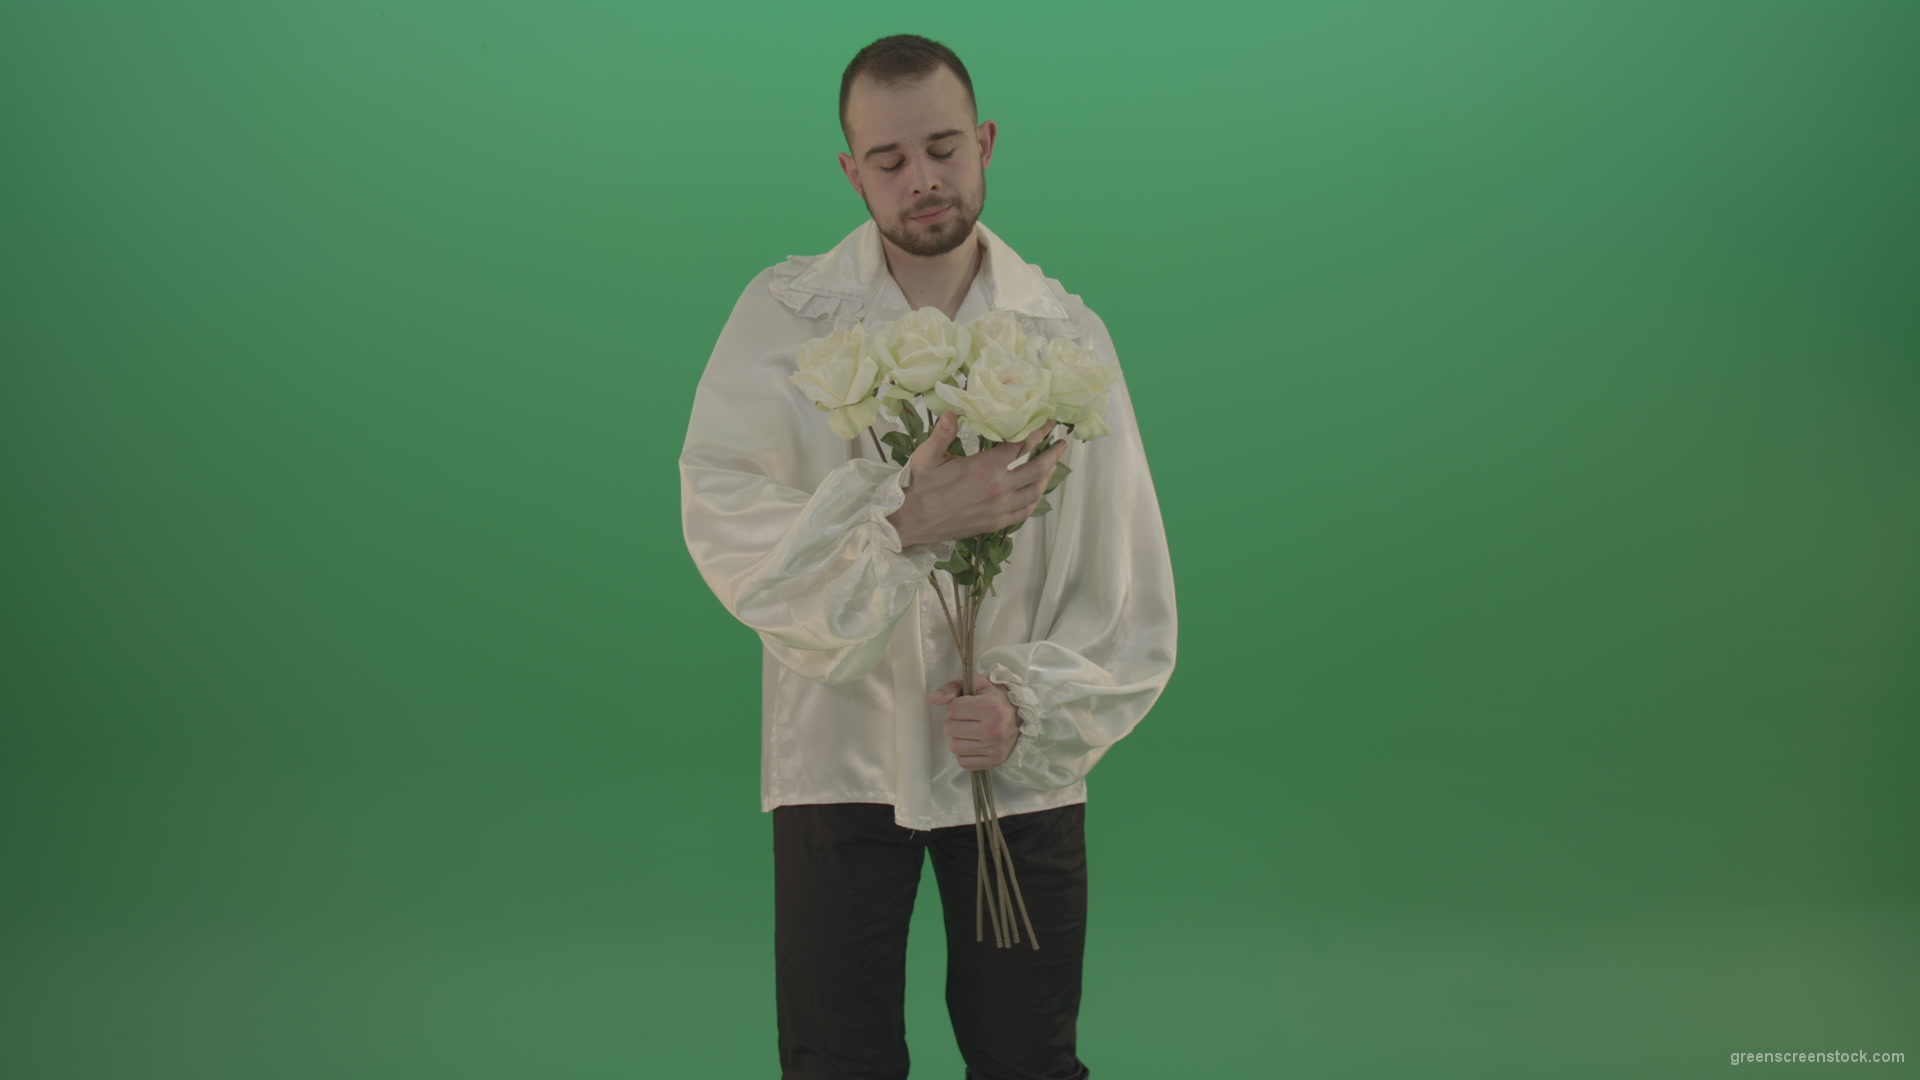 Middle-Age-theater-actor-boy-give-to-camera-White-flowers-isolated-on-green-background_002 Green Screen Stock